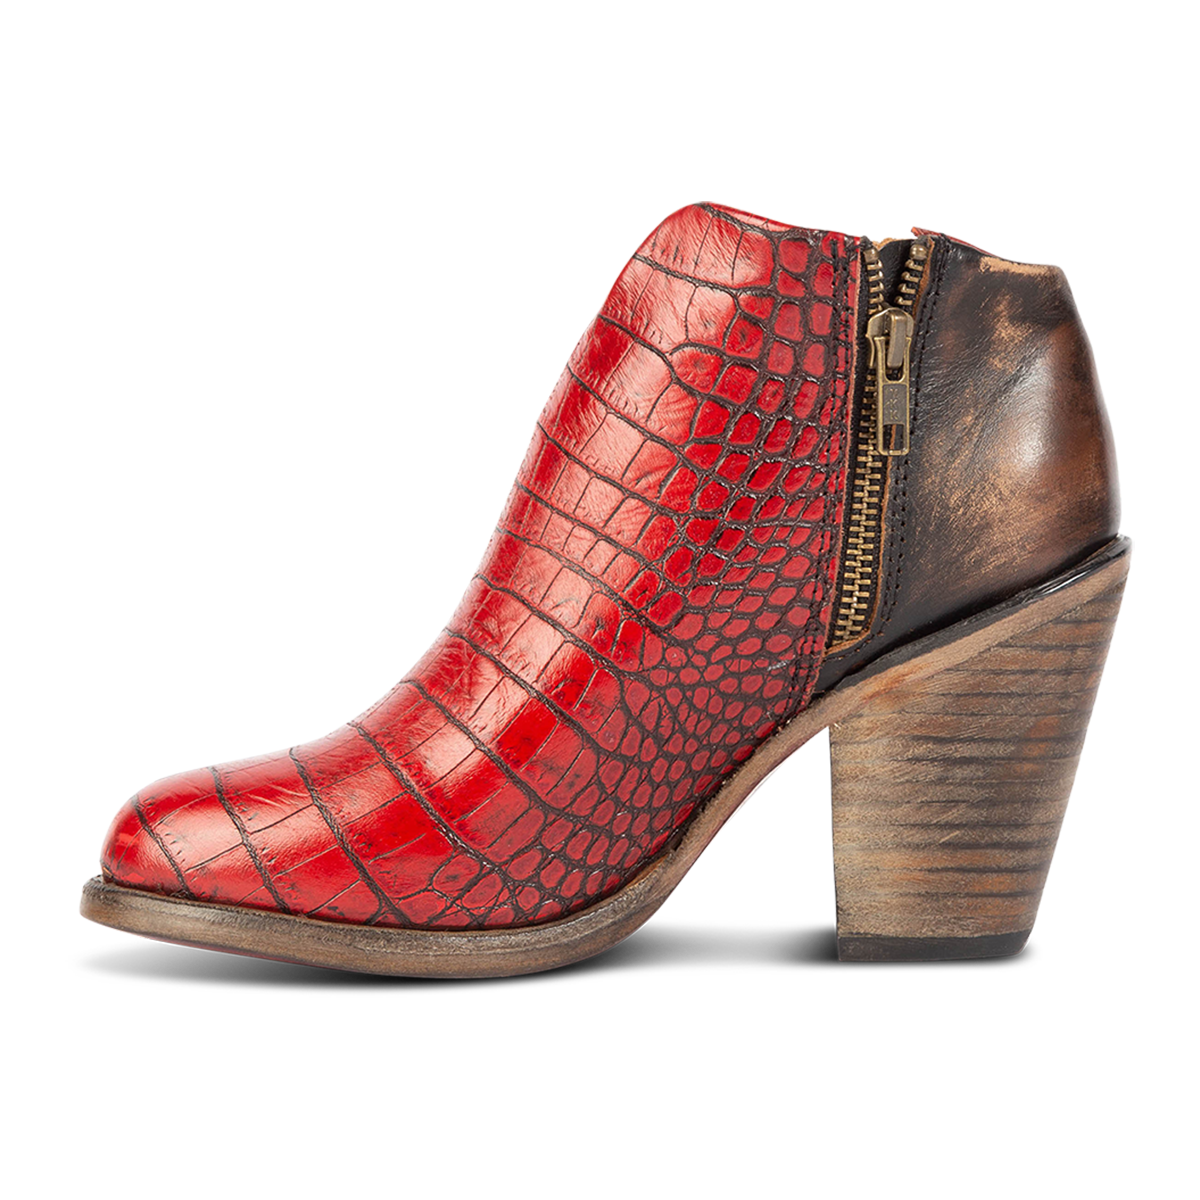 Inside view showing zip closure and two toned leather on FREEBIRD women's Detroit red croco bootie